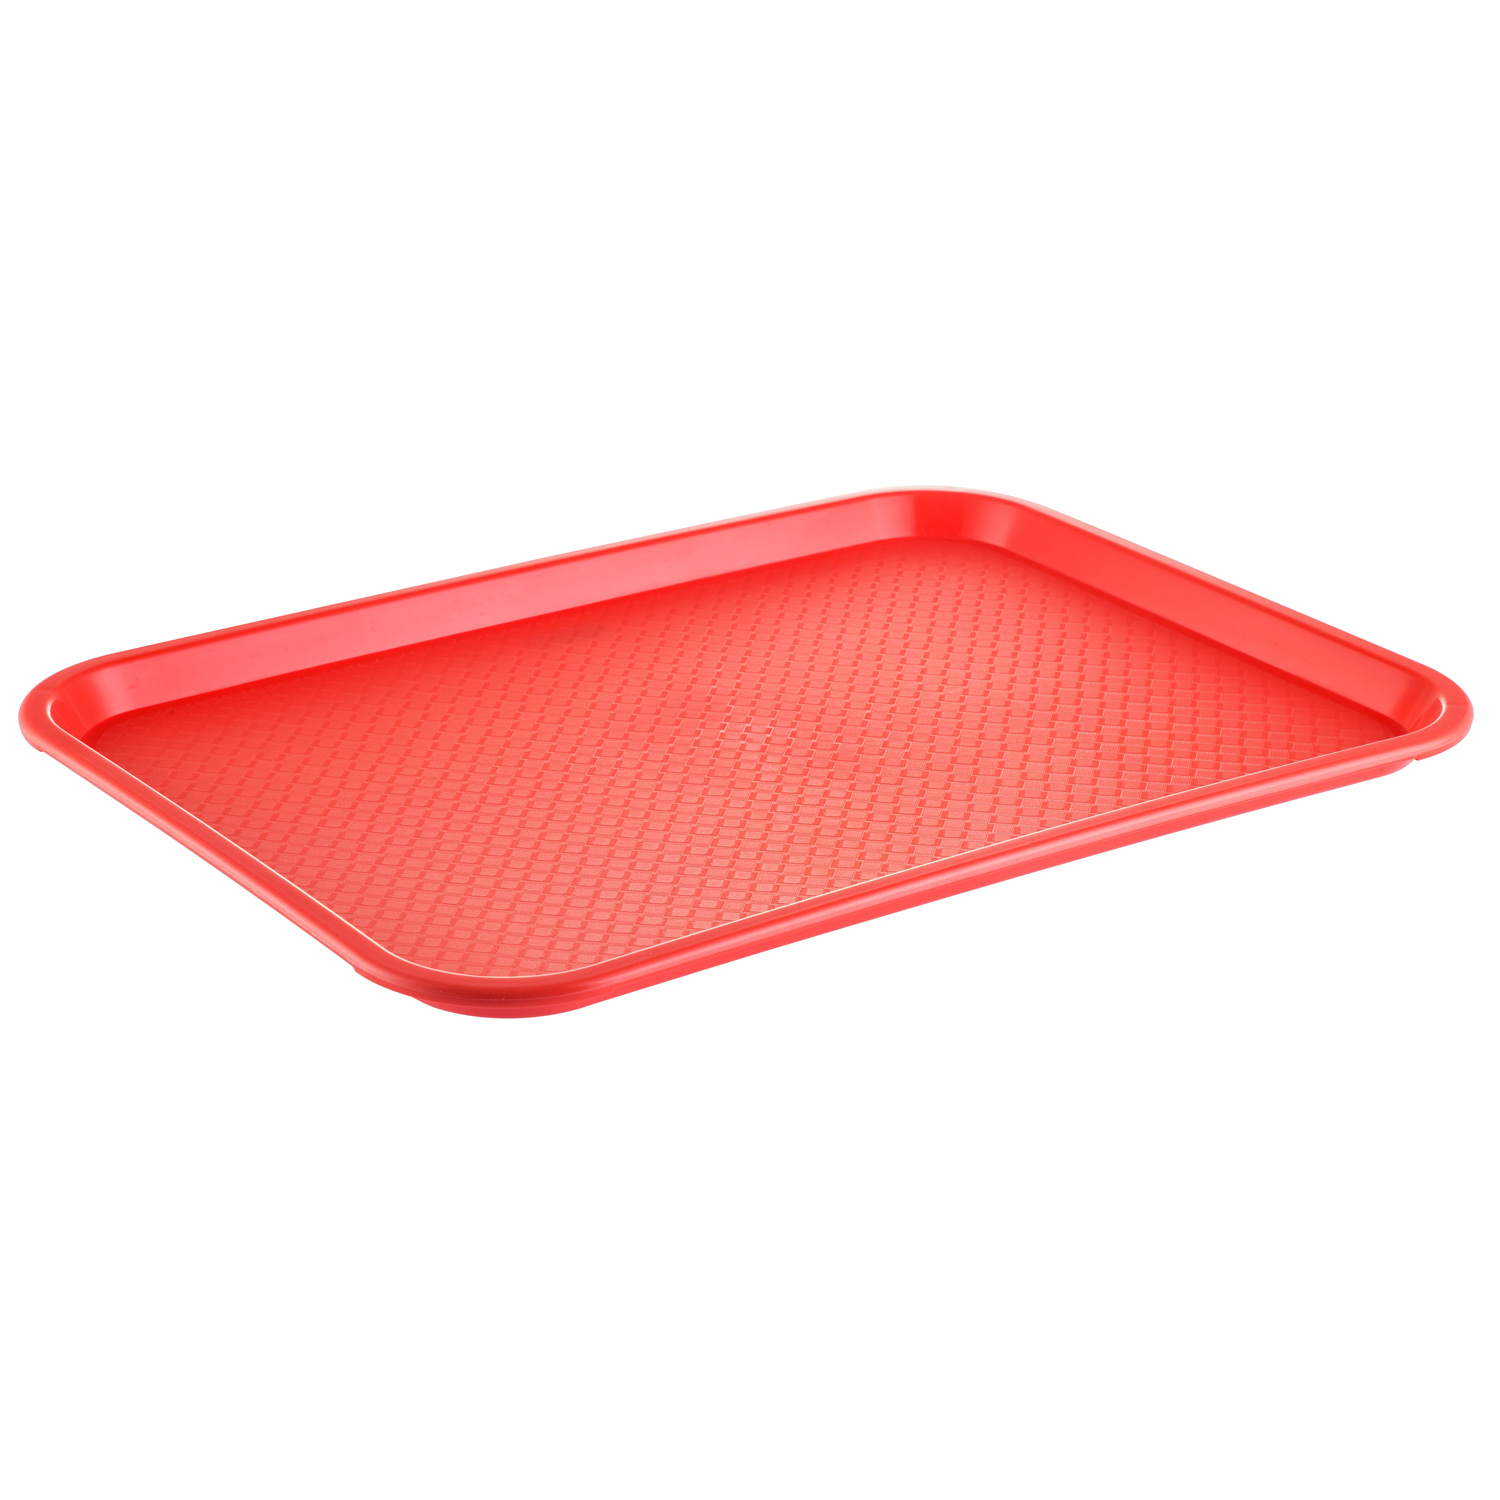 CAC China DSPT-1418OR Orange Fast Food/Cafeteria Tray, 18" x 14" 